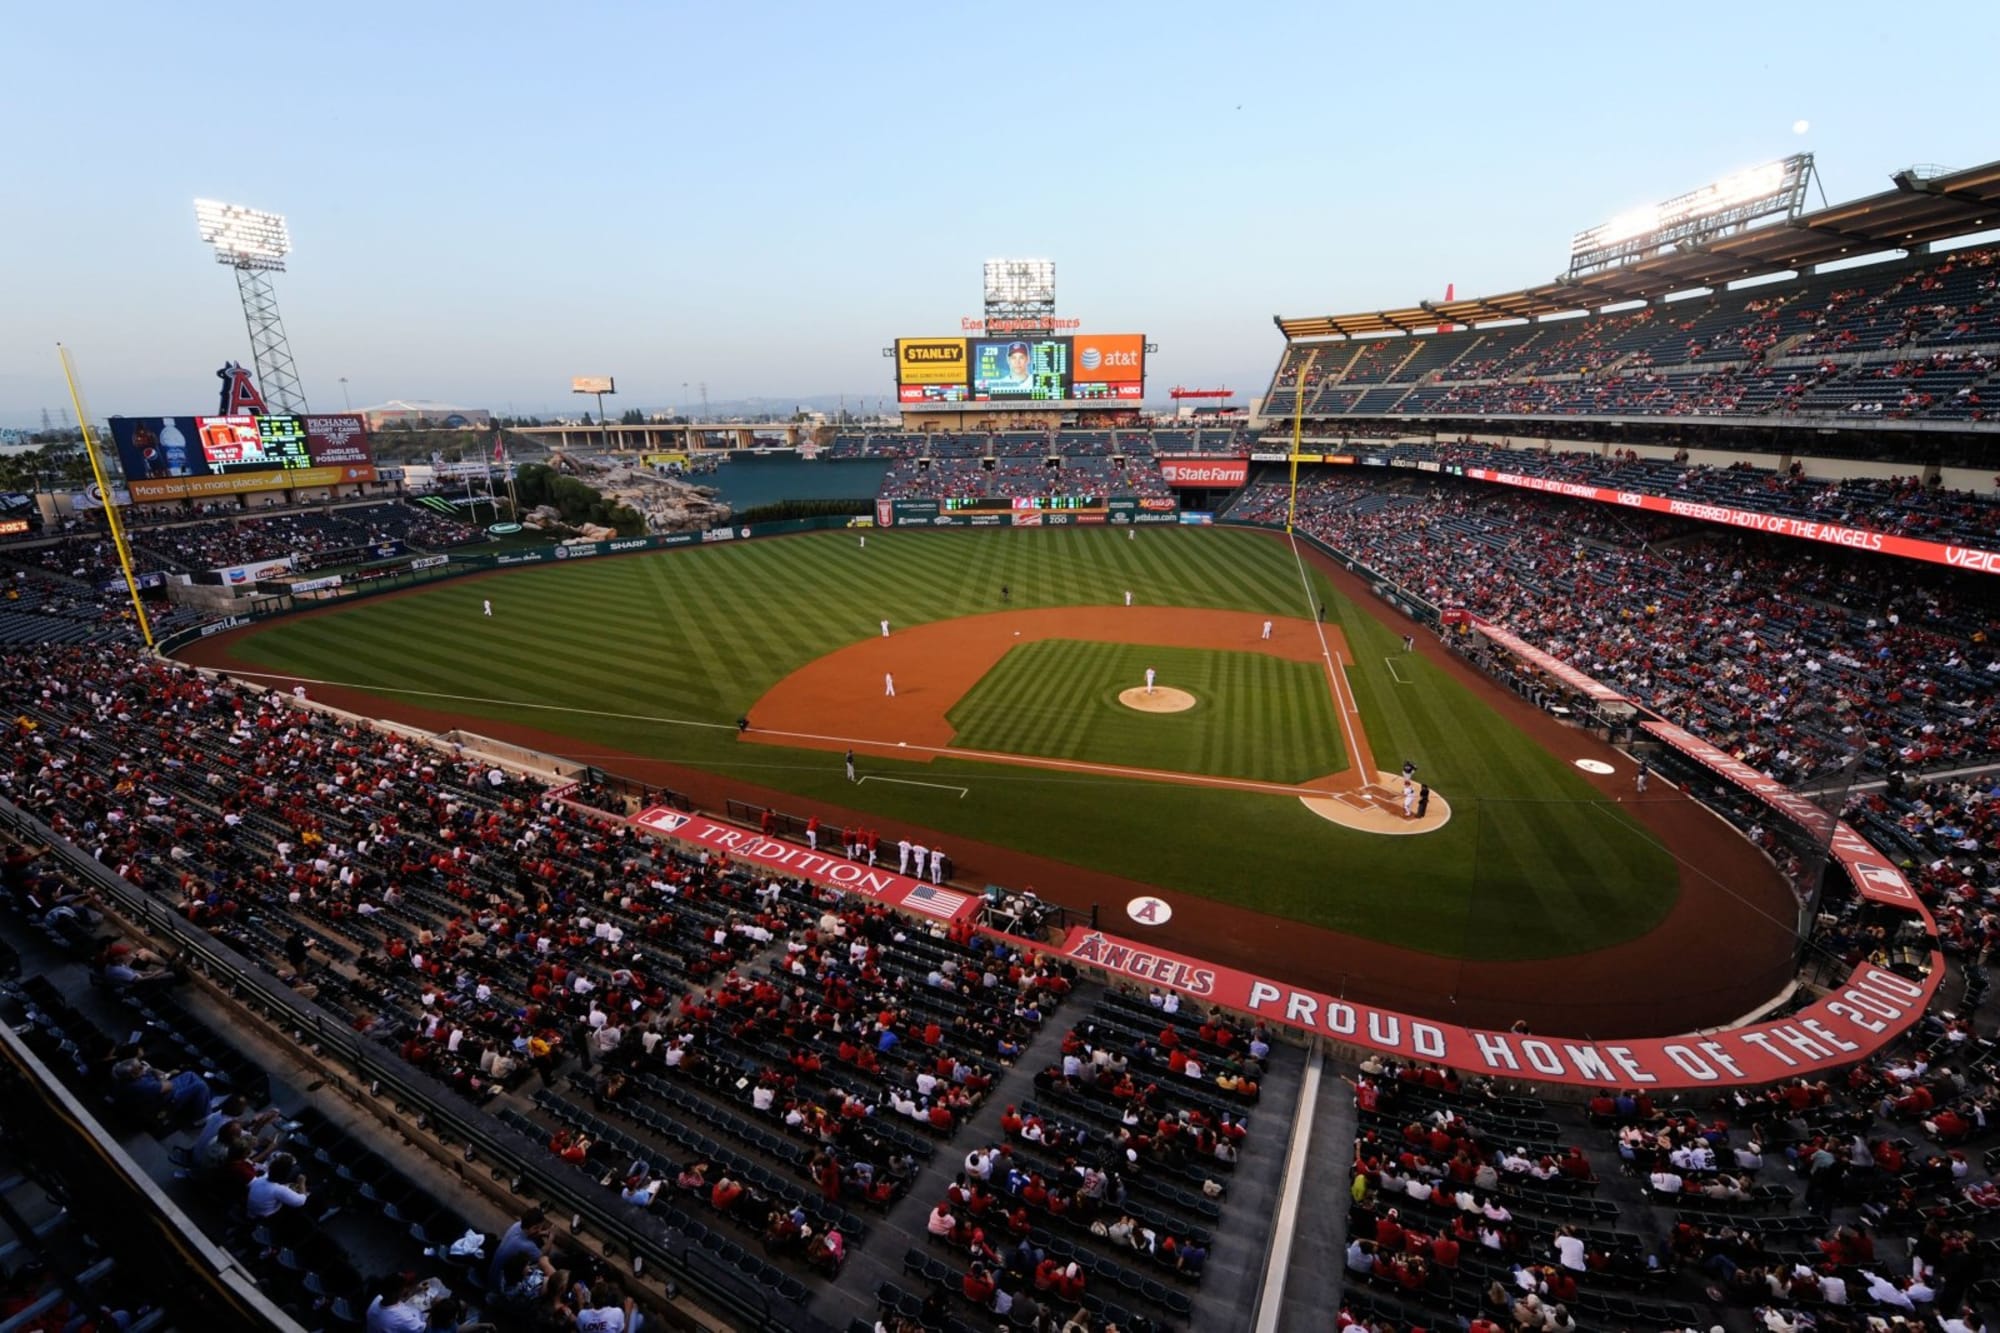 Anaheim Stadium: The time they found marijuana in the outfield